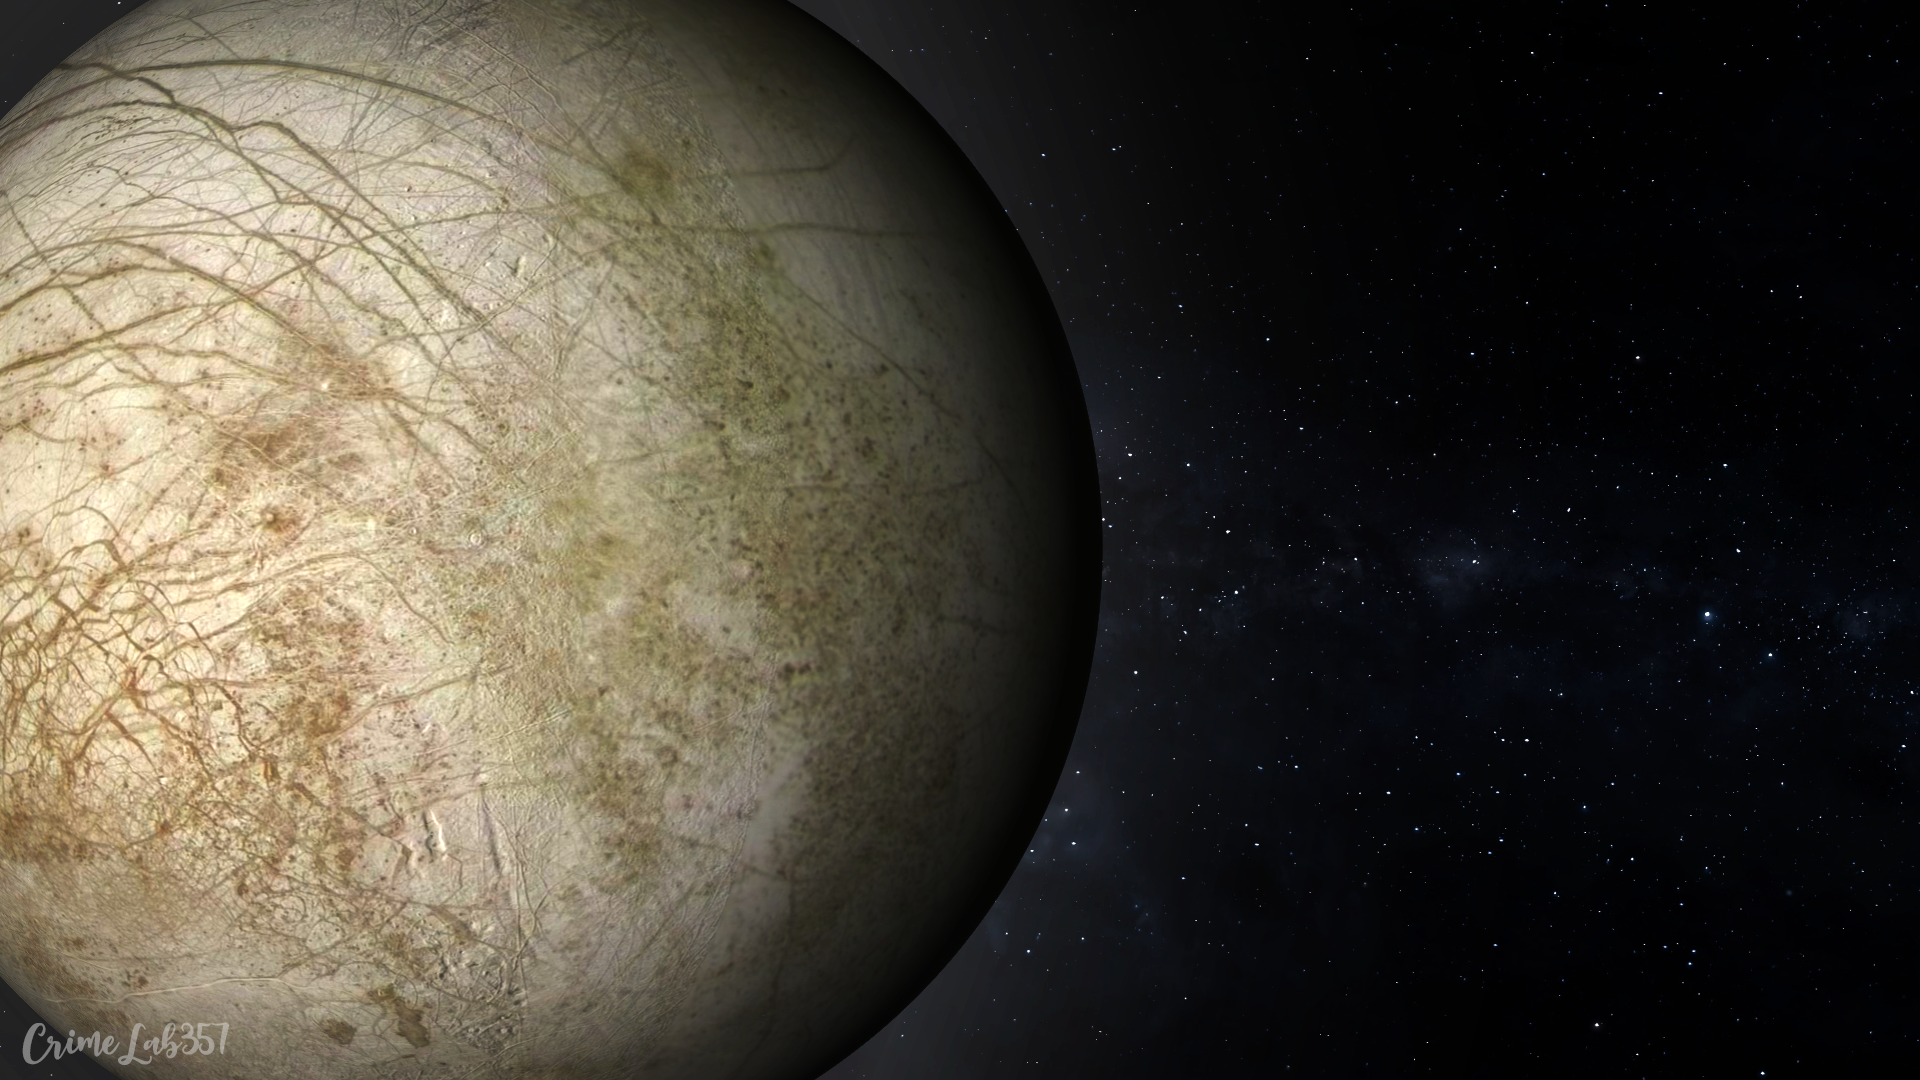 Europa Space Watermarked 3D Graphics 1920x1080